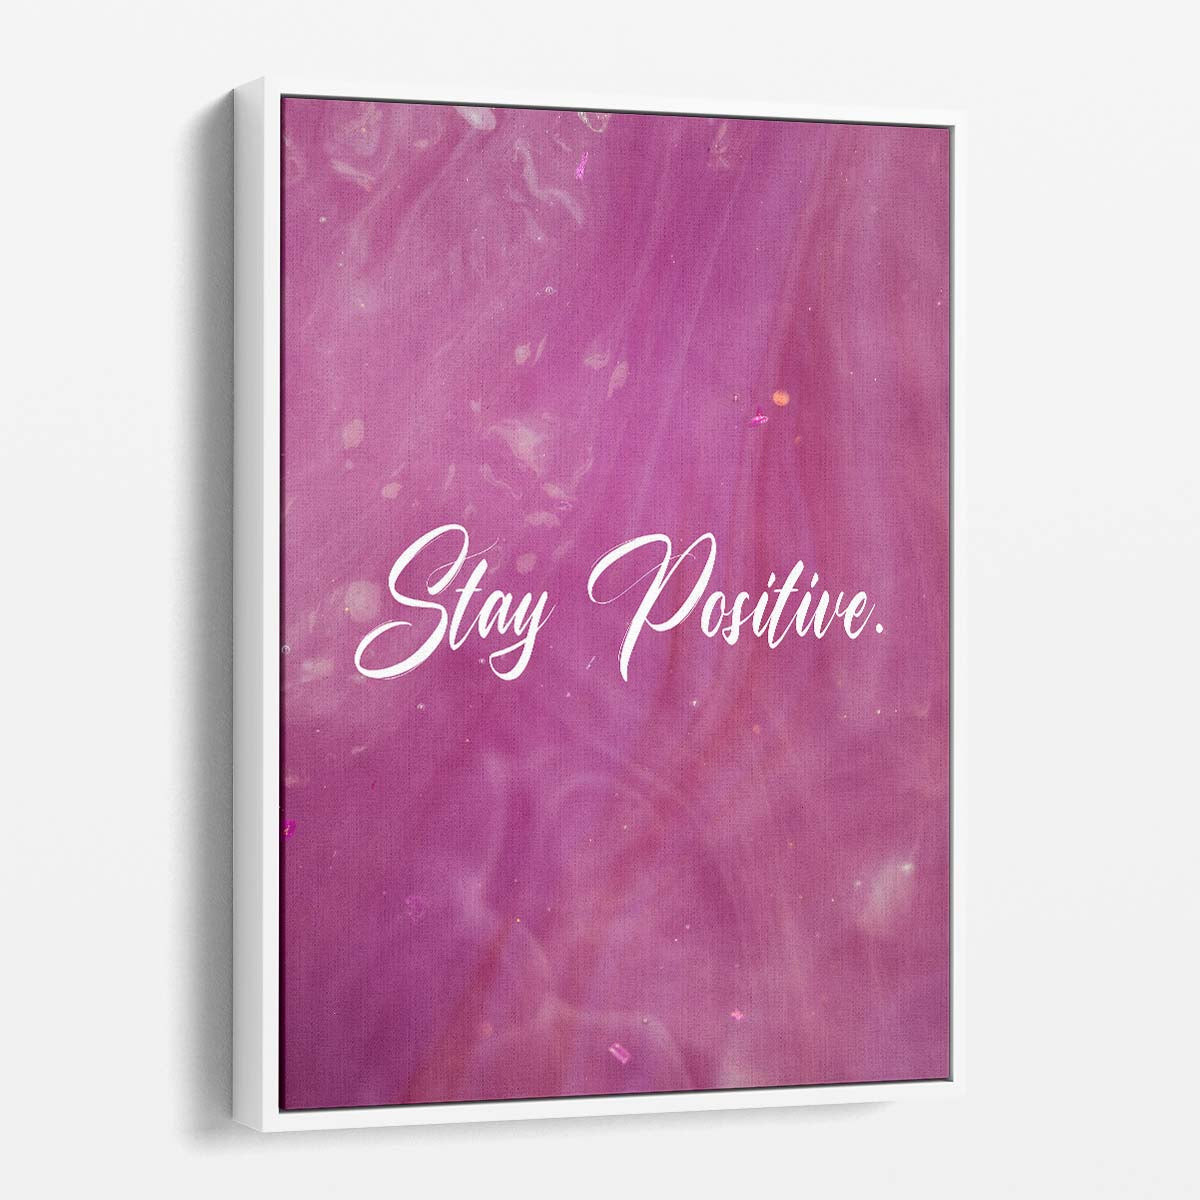 Stay Positive Quote Wall Art by Luxuriance Designs. Made in USA.